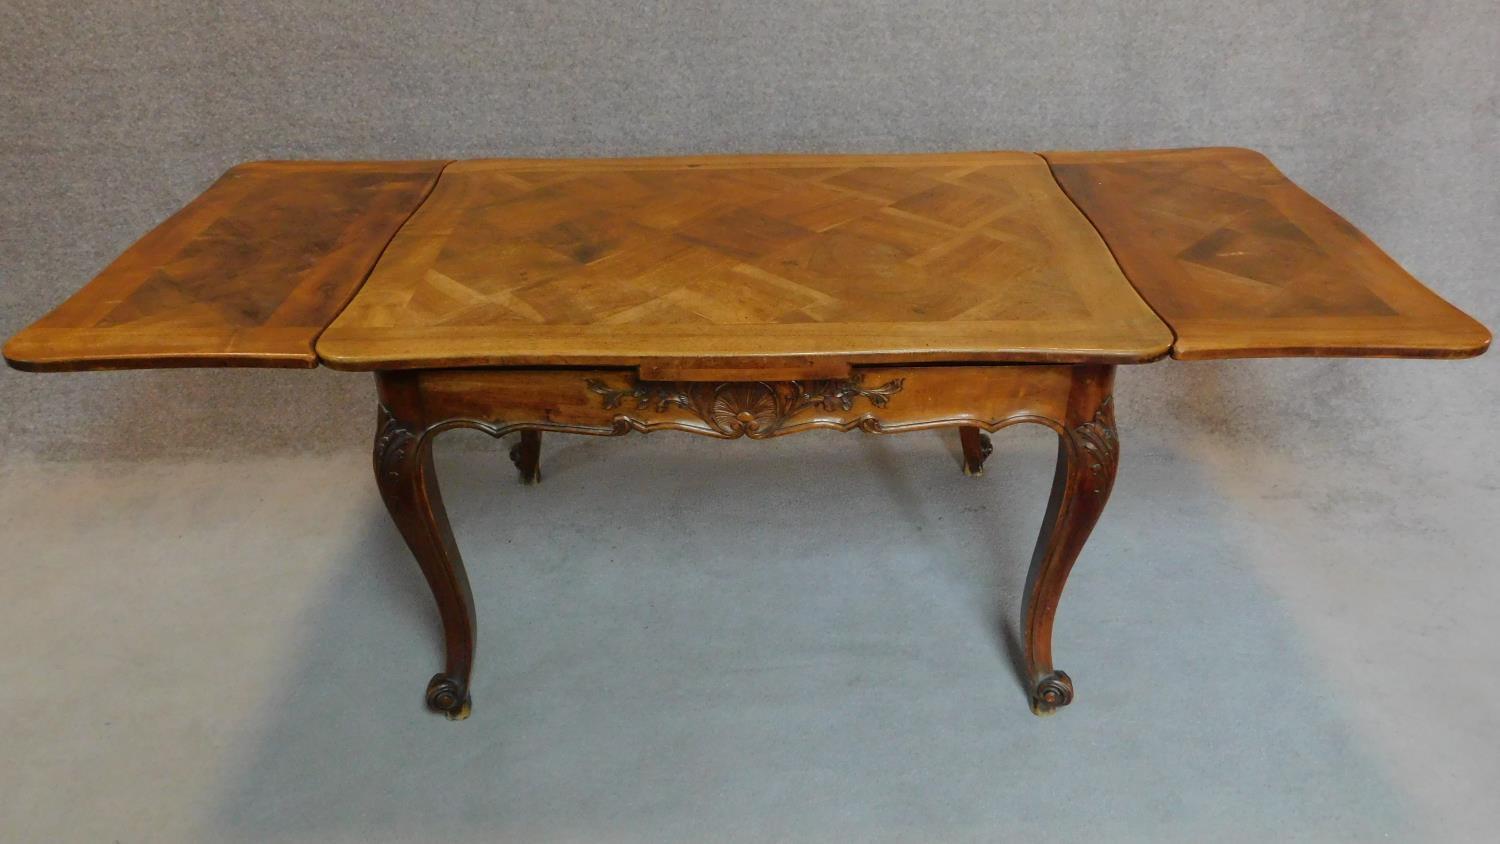 A French walnut draw leaf dining table with parquetry top on well carved base with cabriole